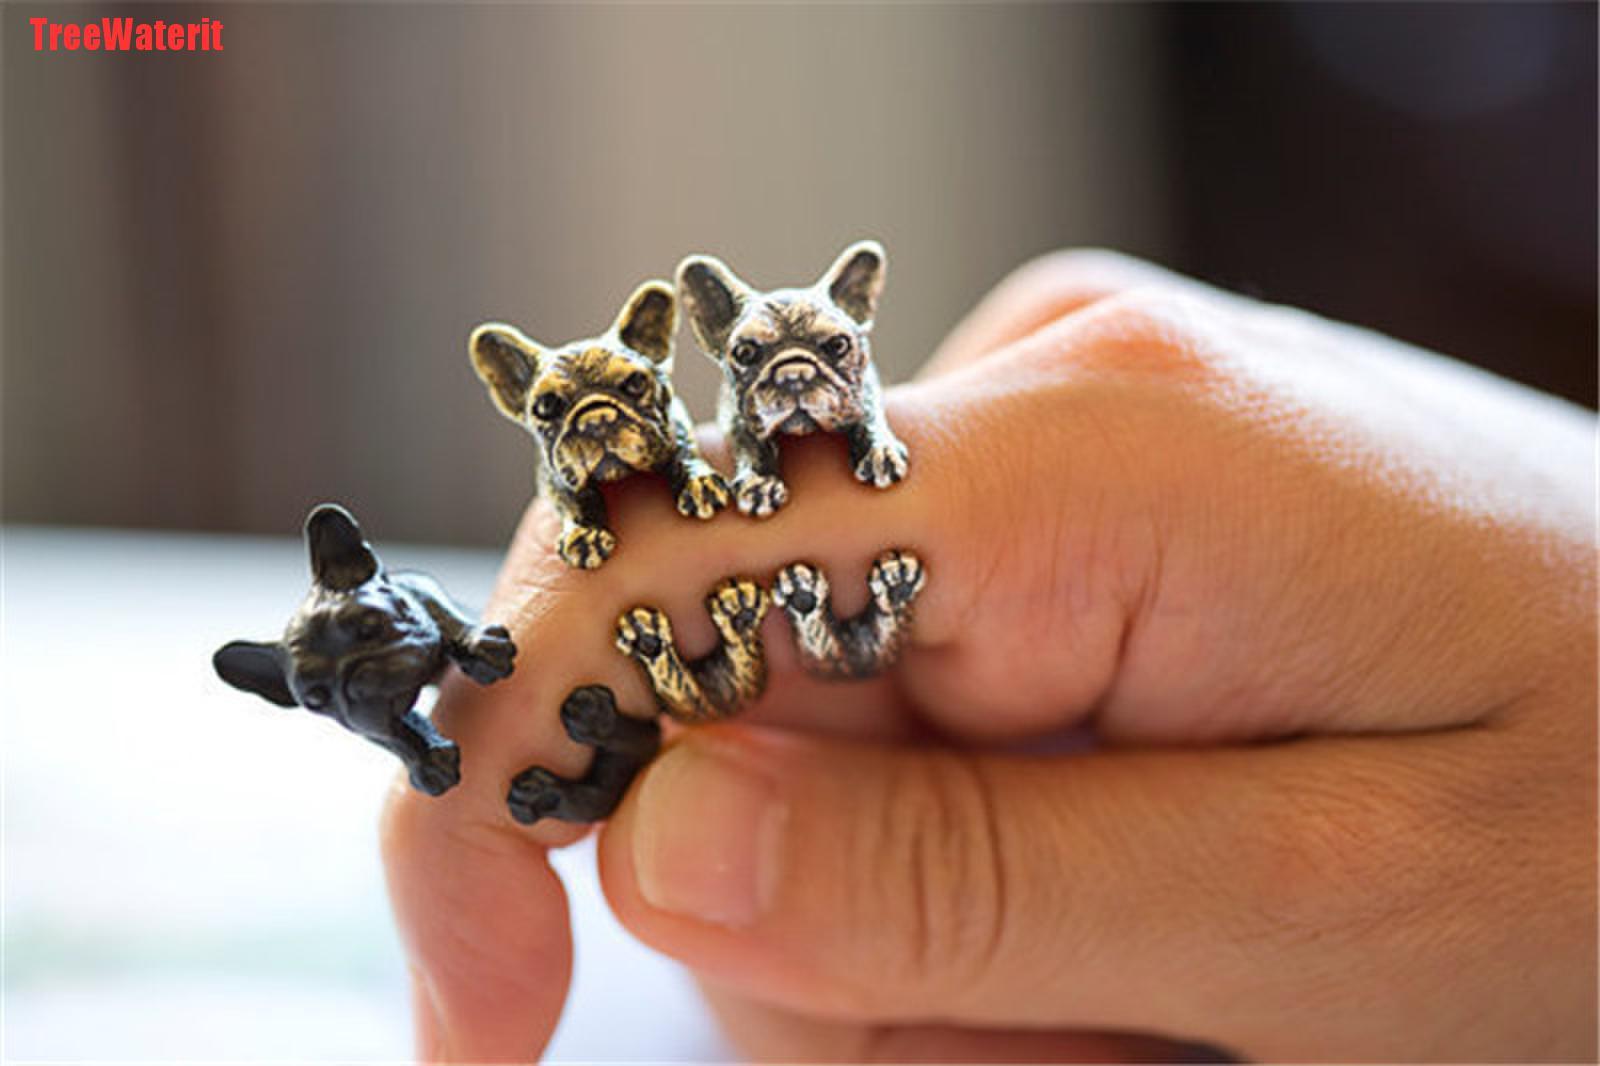 TreeWaterit Vintage French Bulldog Animal Wrap Rings Gift for Women and Men Fashion Jewelry